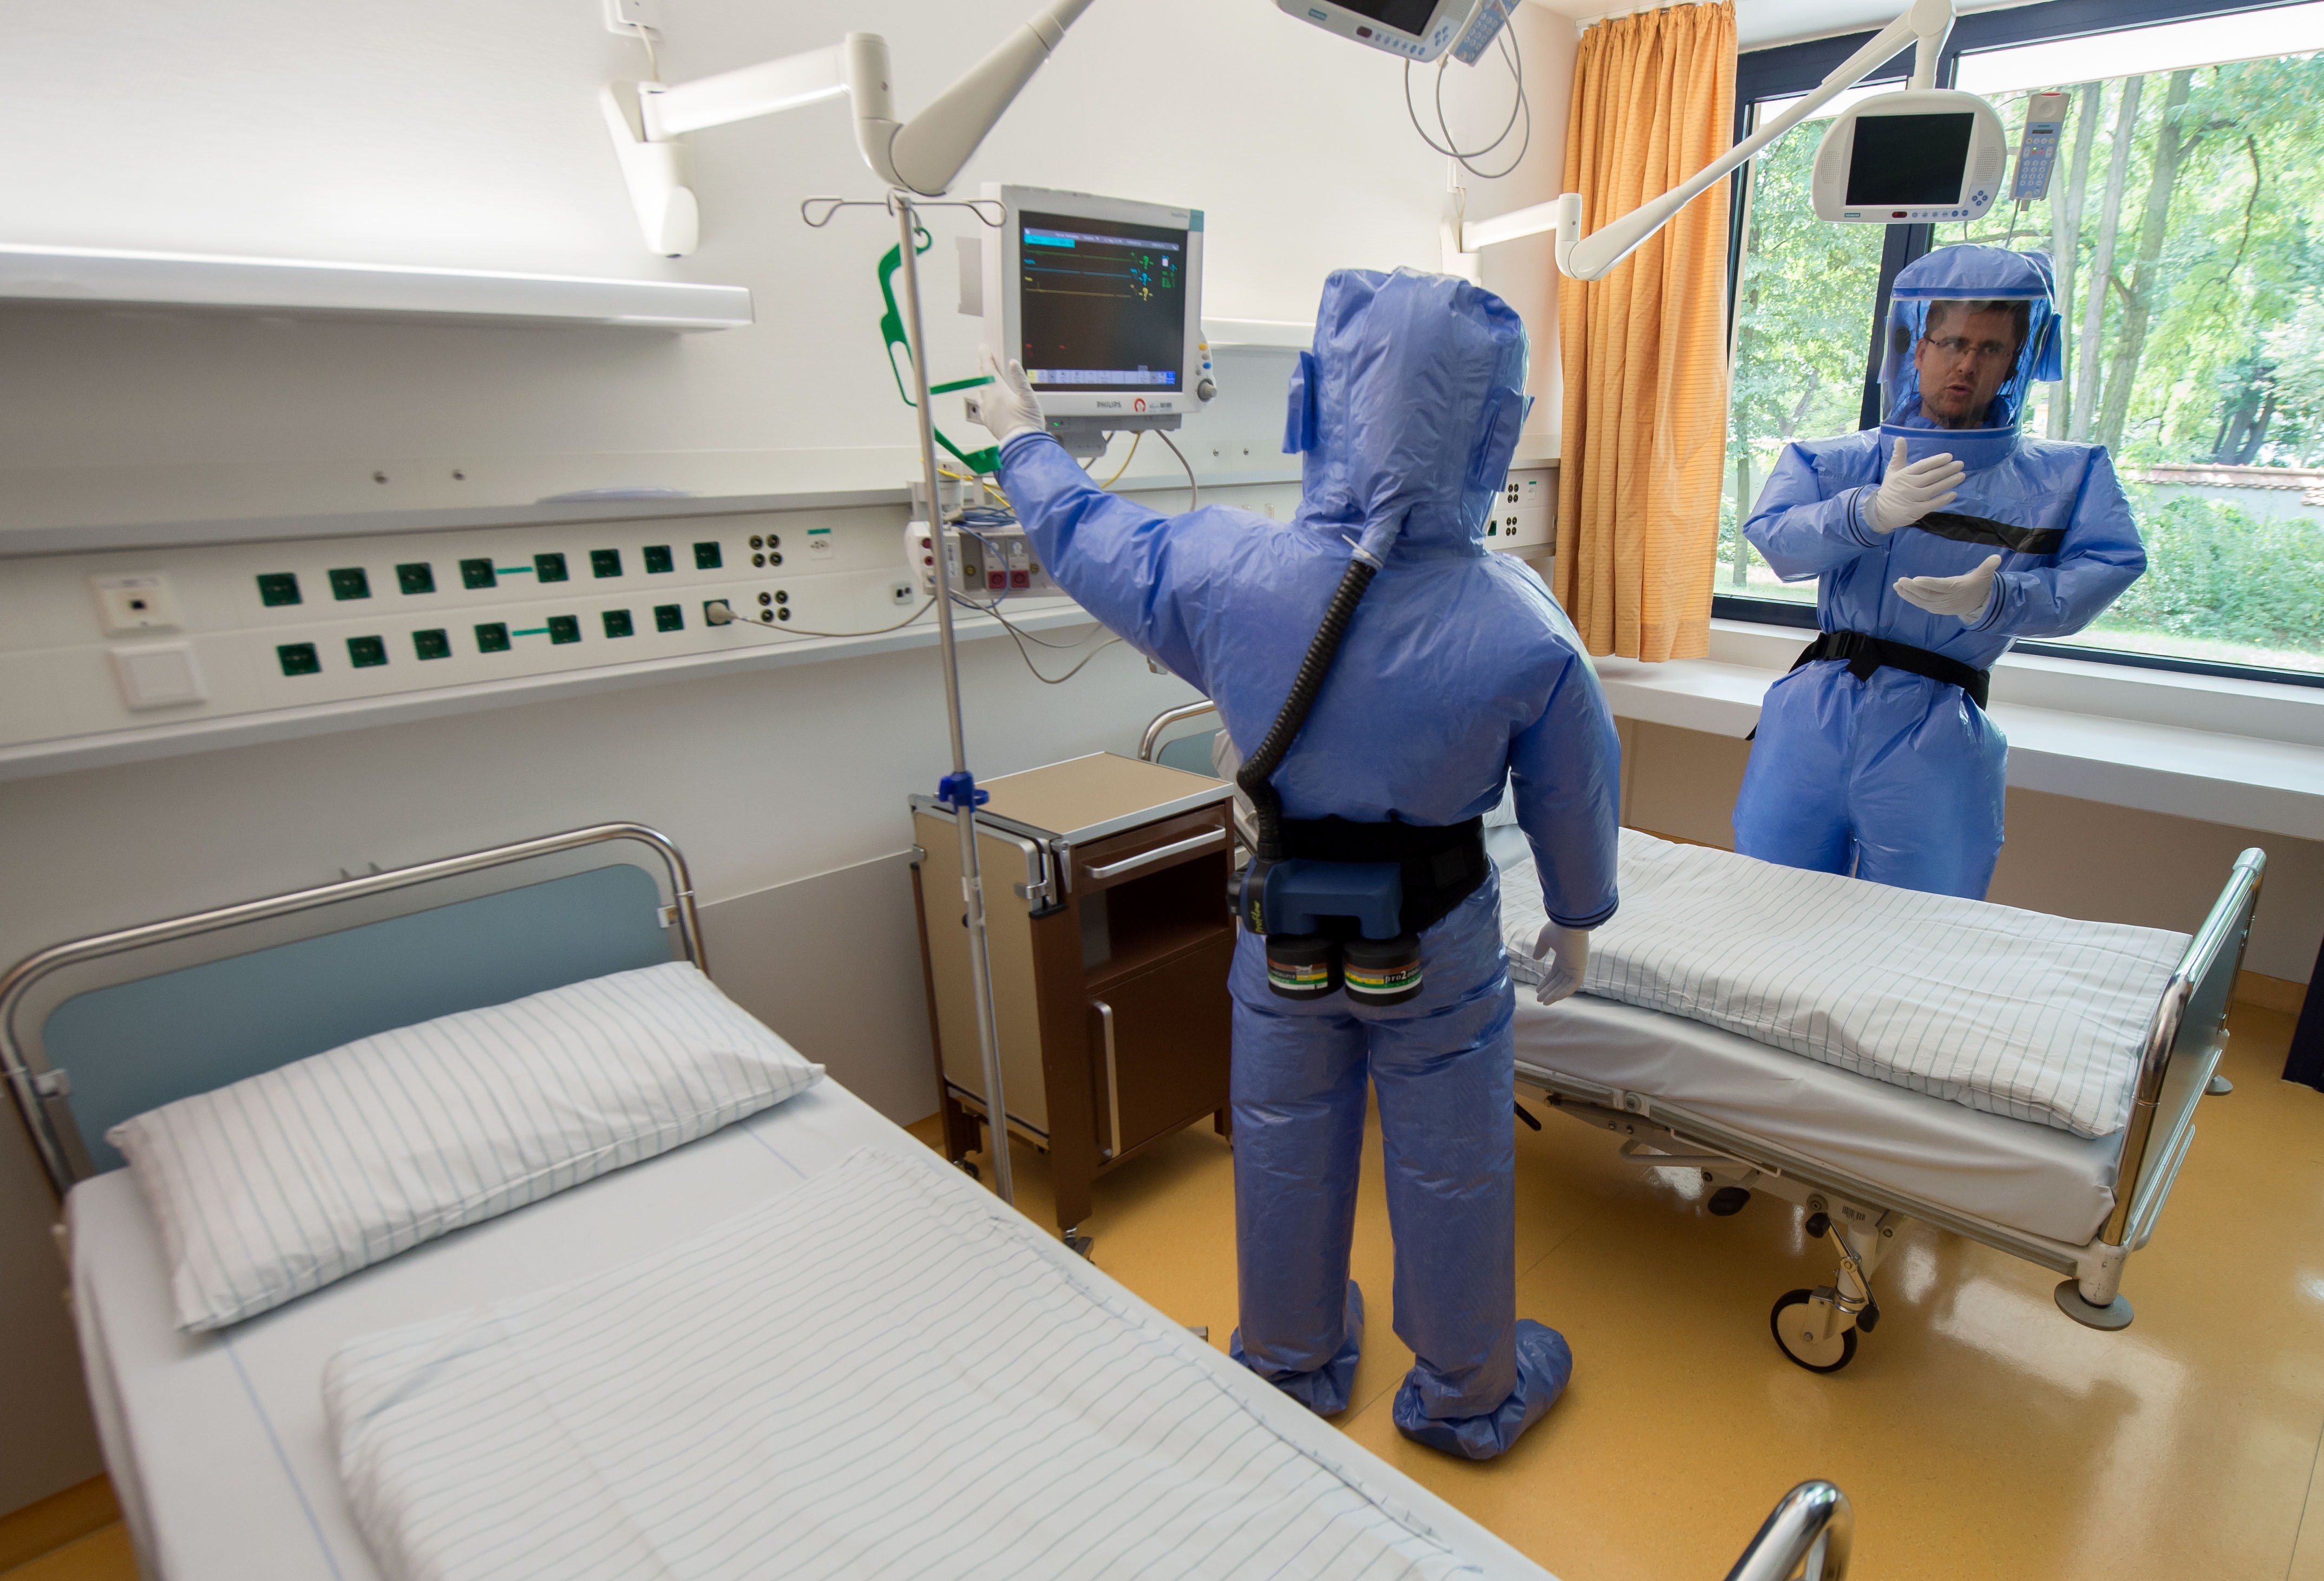 Infectious disease specialist Florian Steiner and quarantine office leader Thomas Klotzkowski wear protective clothing as they stand in a sick room during a demonstration of the proceedings at the ward of Berlin's Charite hospital on August 11, 2014.